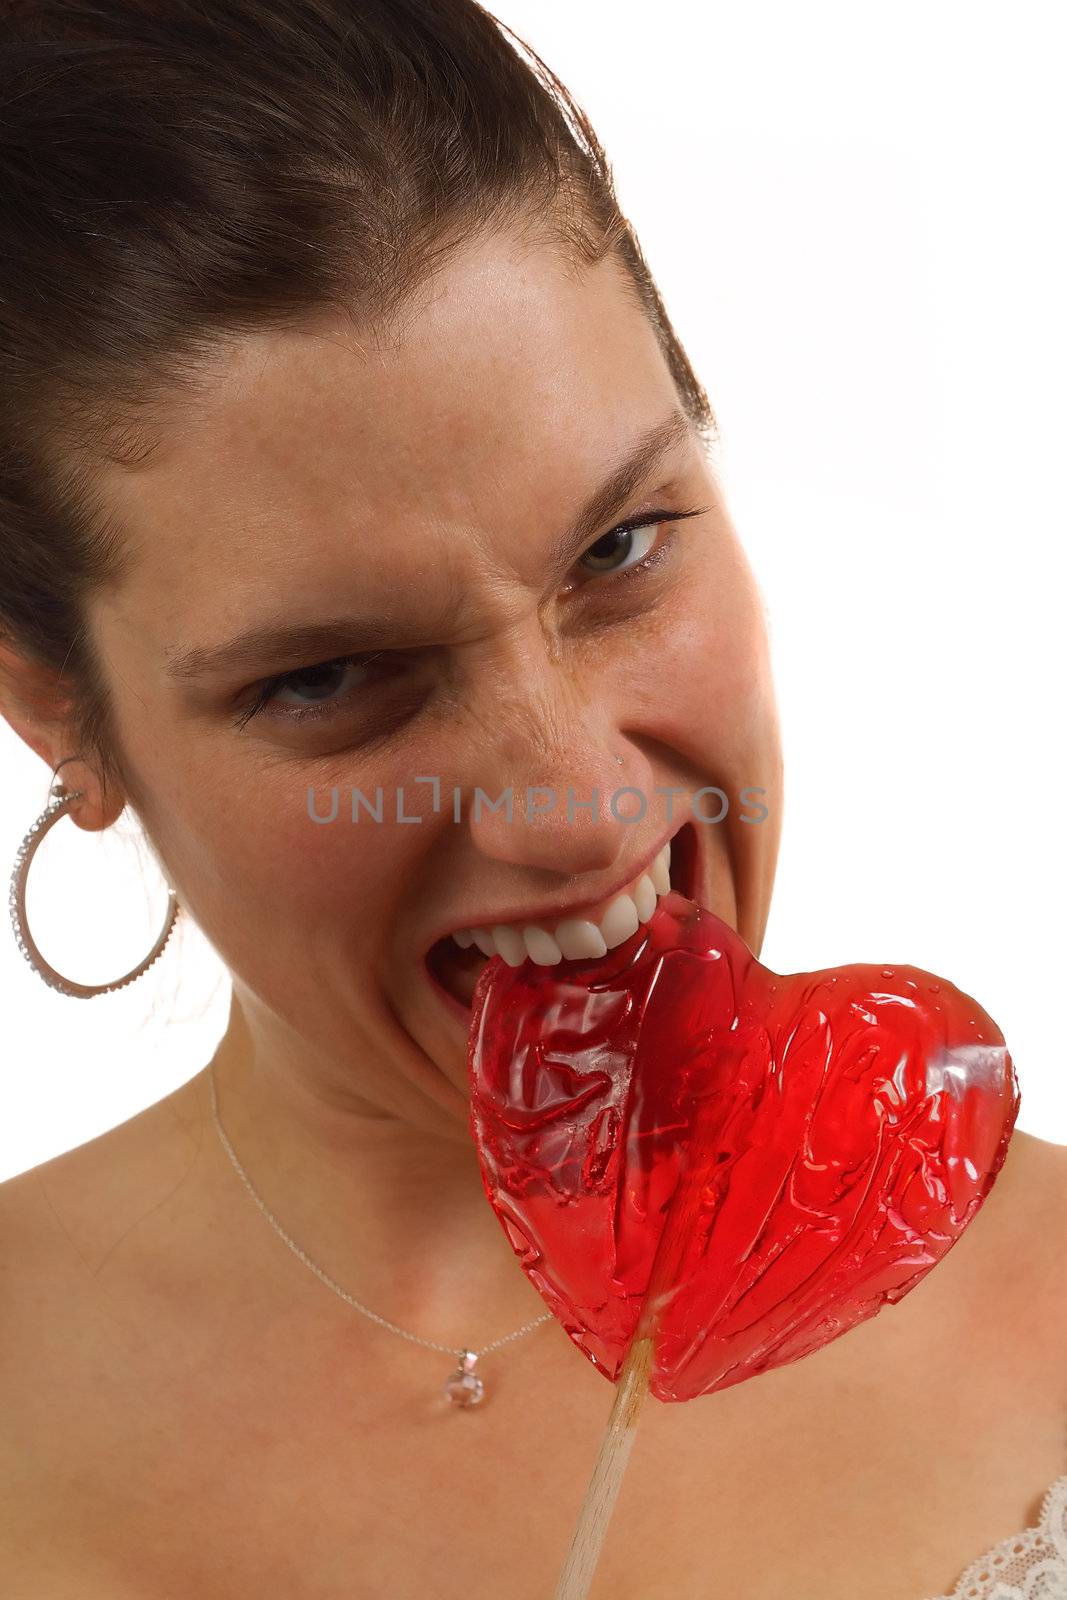 Young woman bites hard on heart shaped lollipop, isolated over white